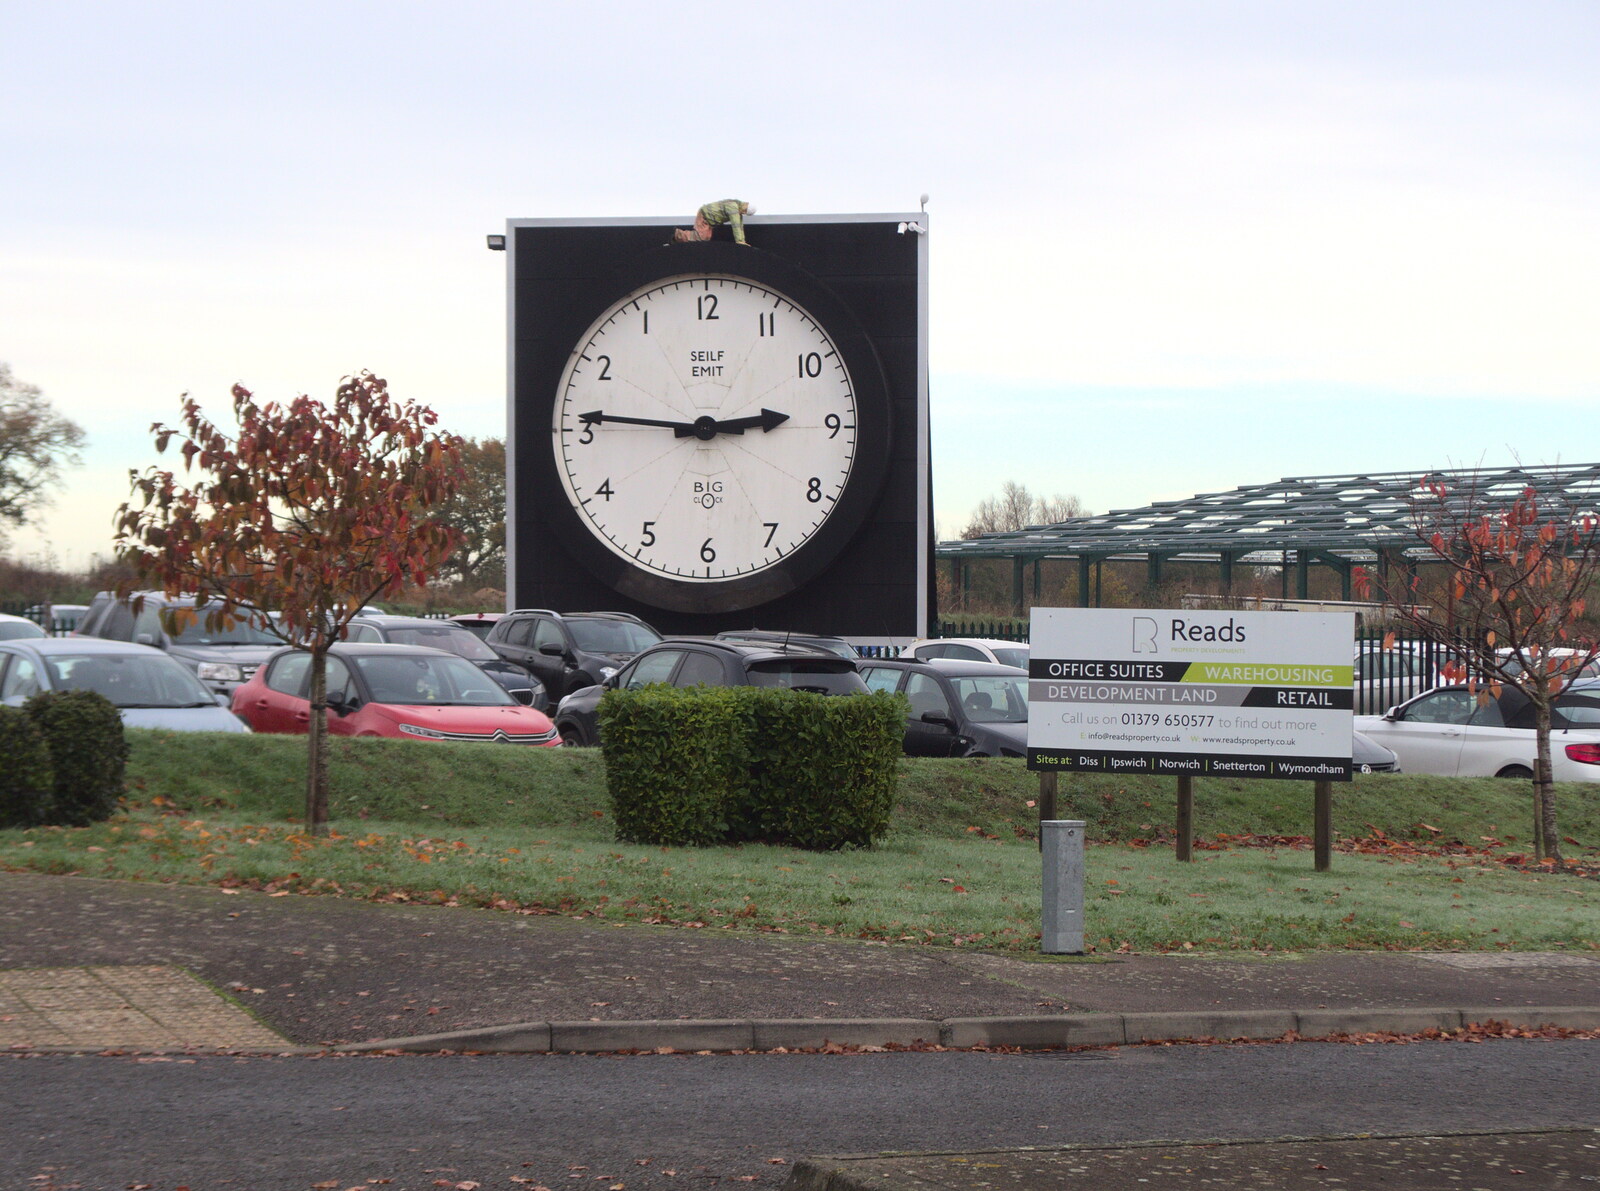 The giant backwards clock is still there from Lunch in Norwich and the GSB at Gislingham, Suffolk - 26th November 2022